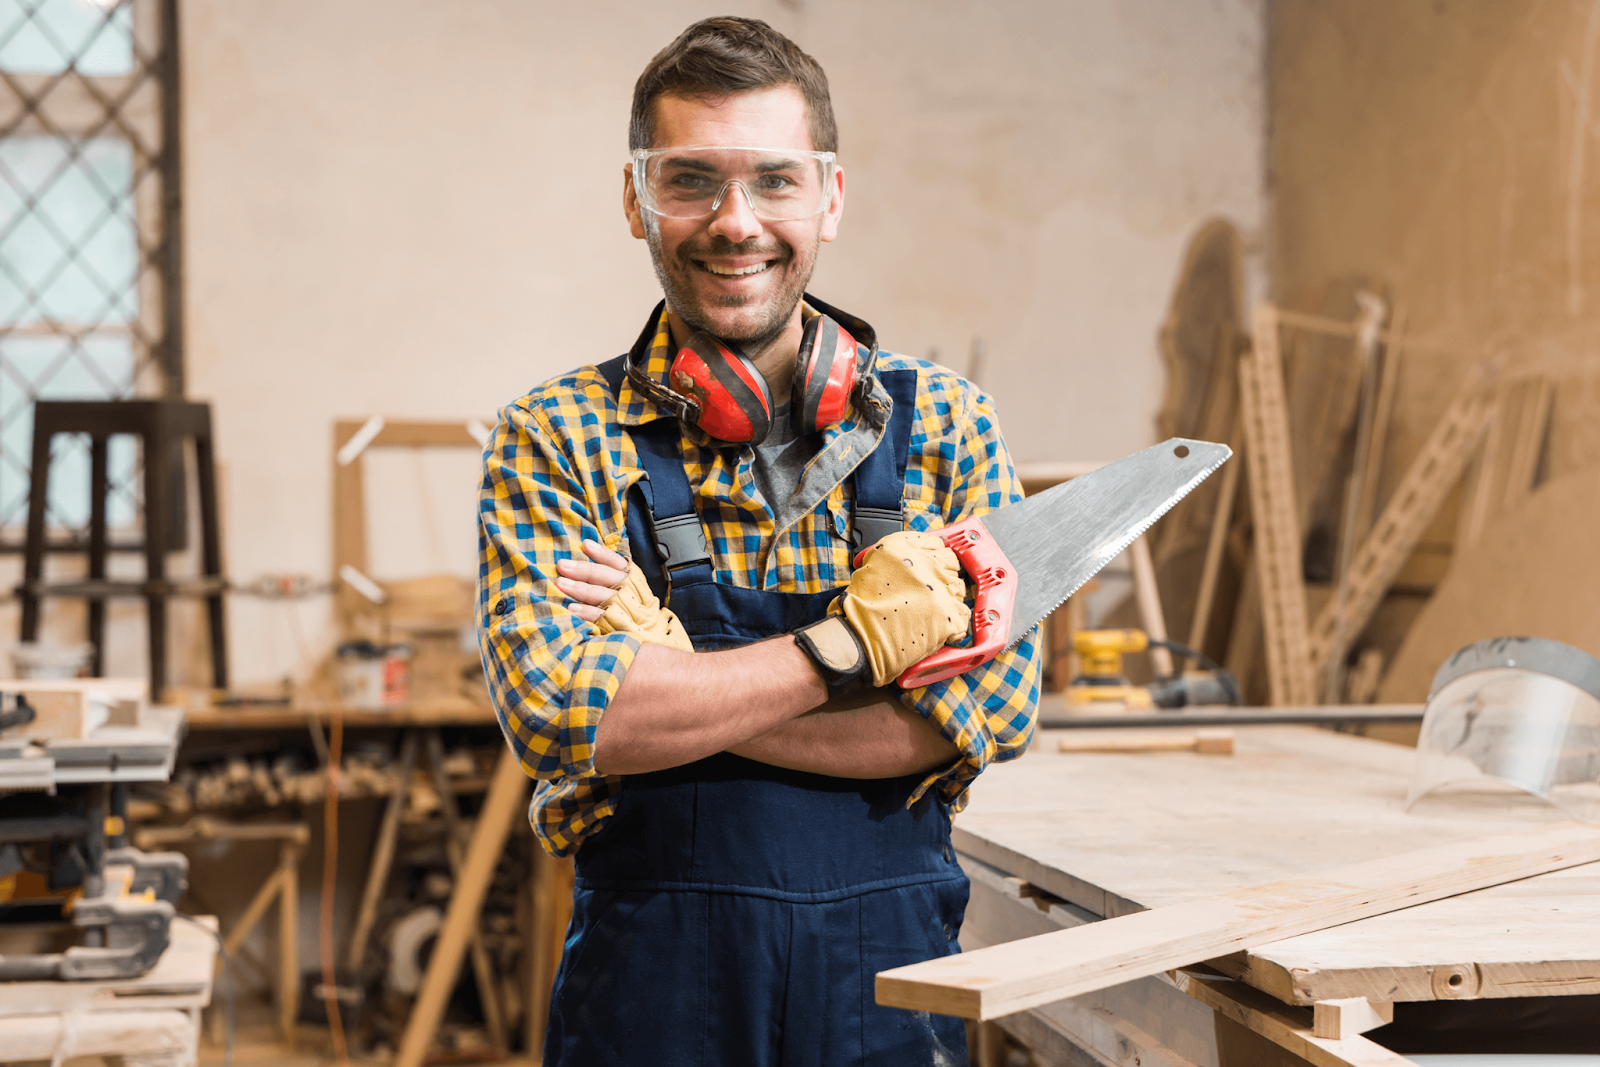 4 Things To Look for When Choosing Professional Carpentry Services